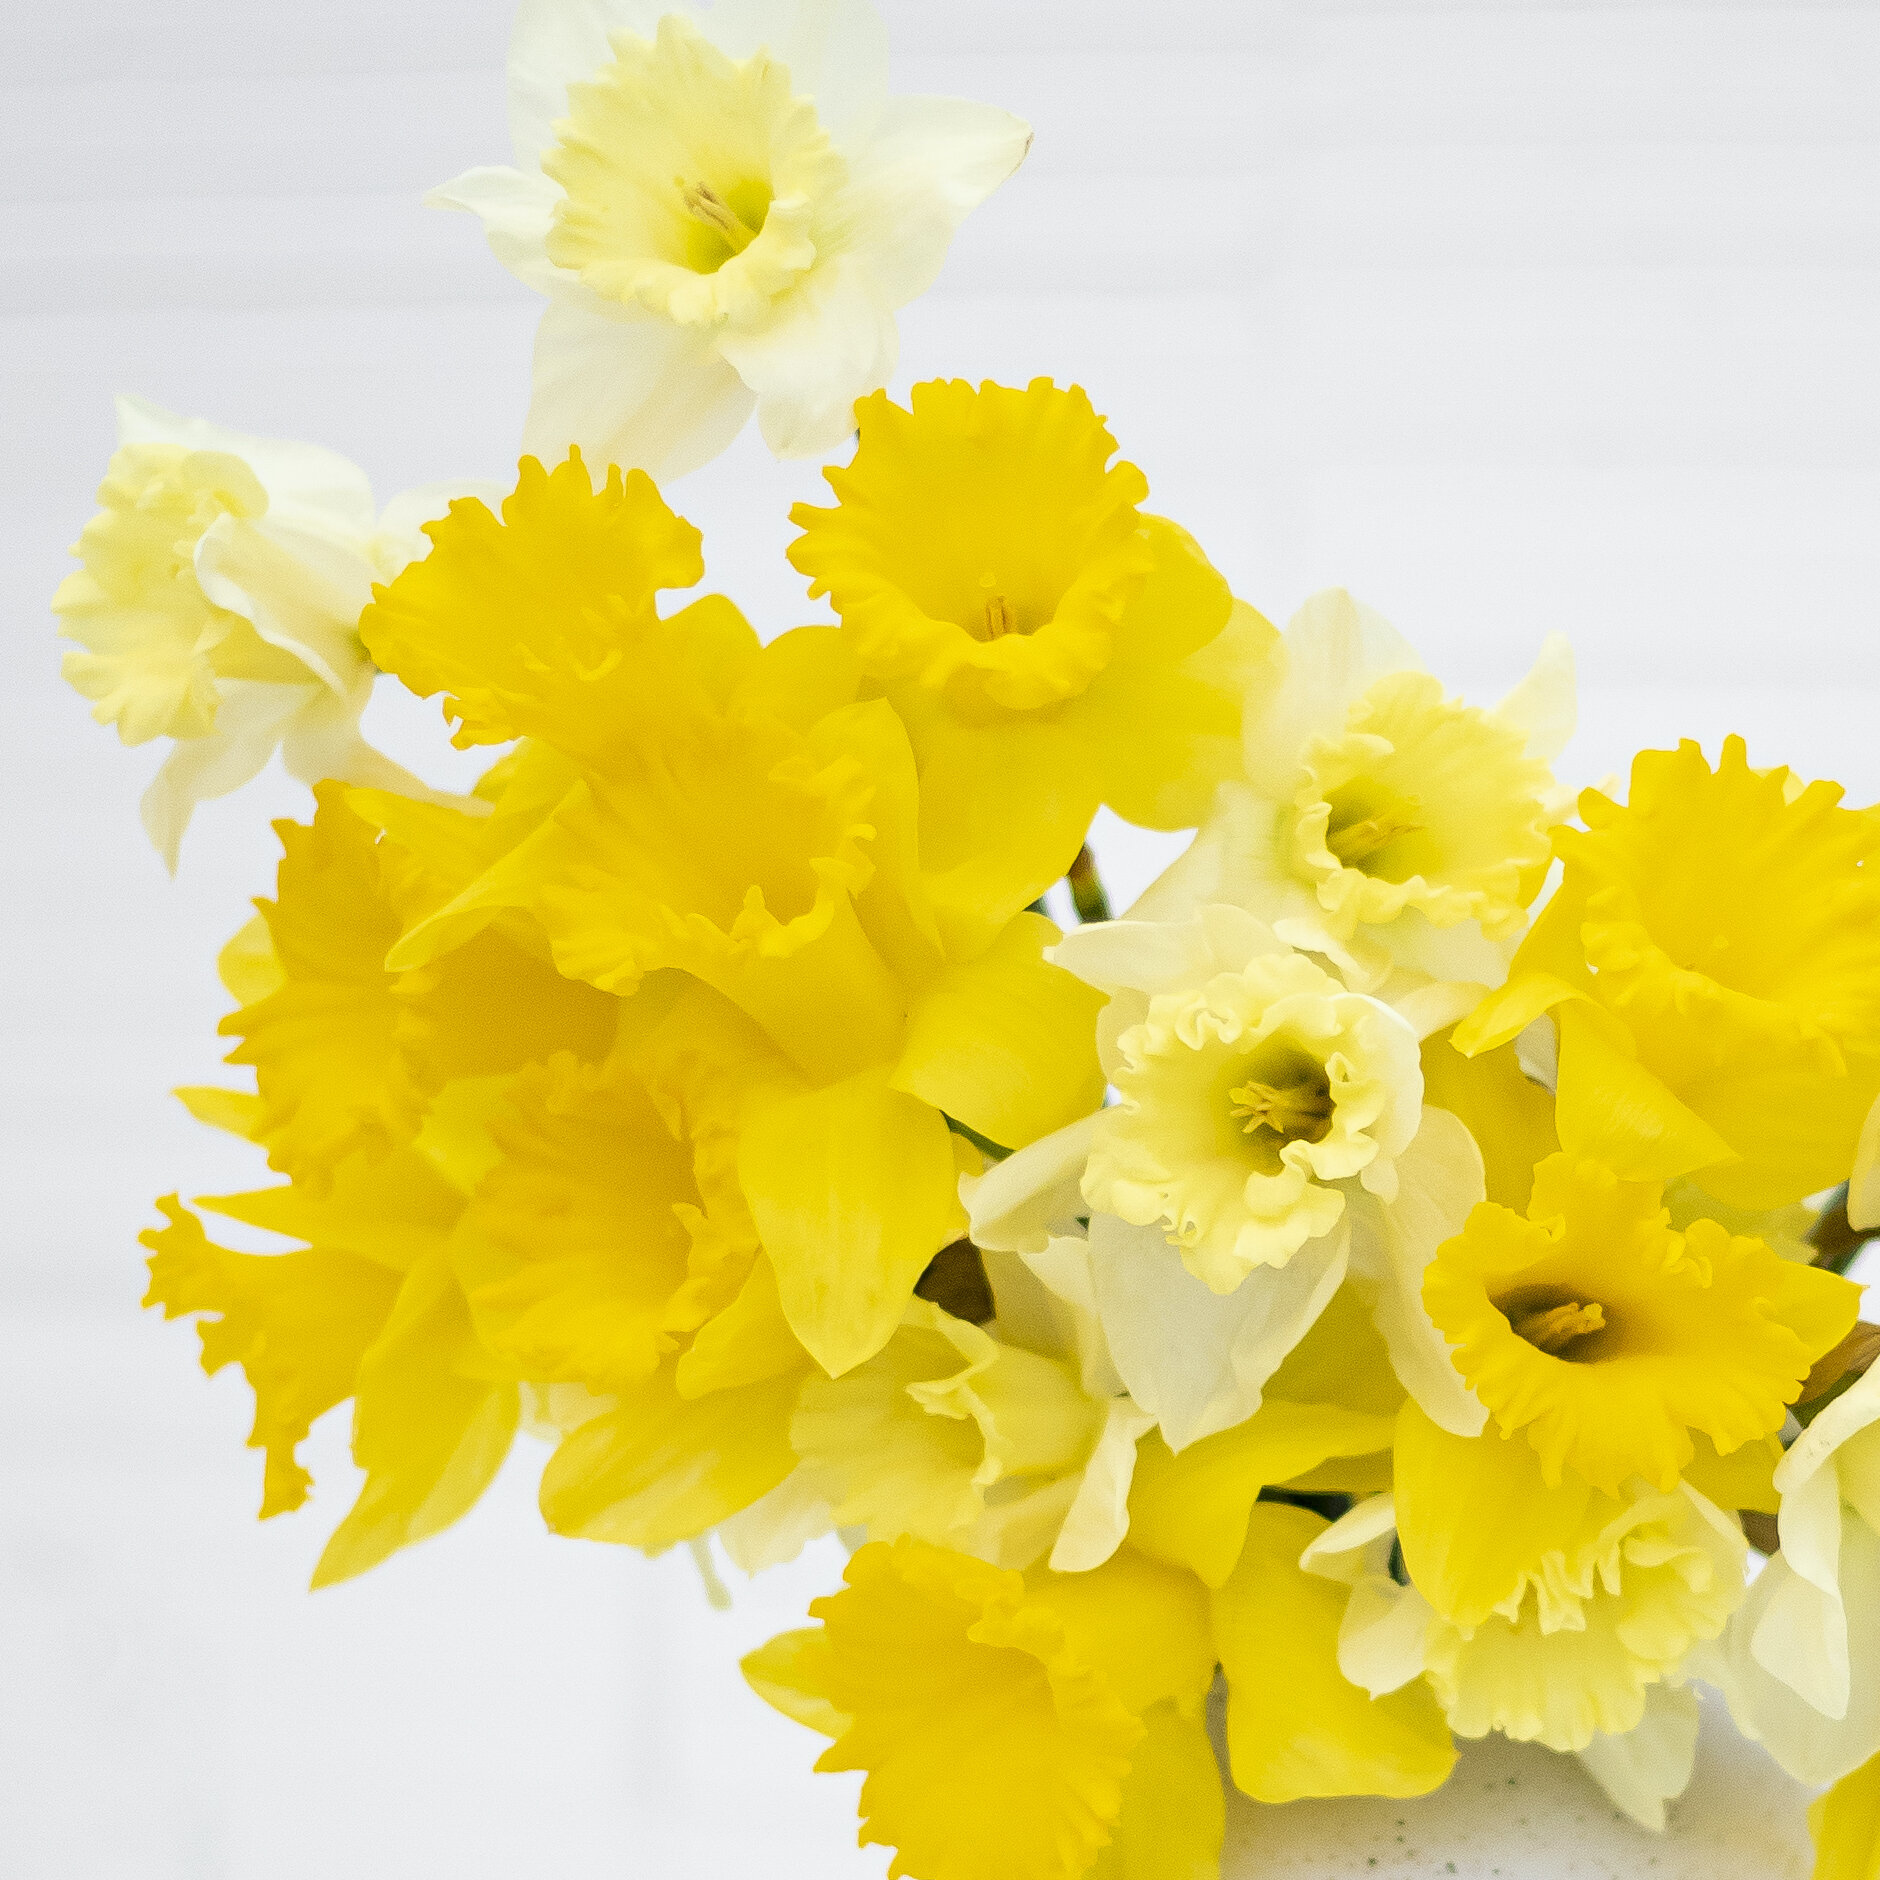 A close up of yellow daffodils